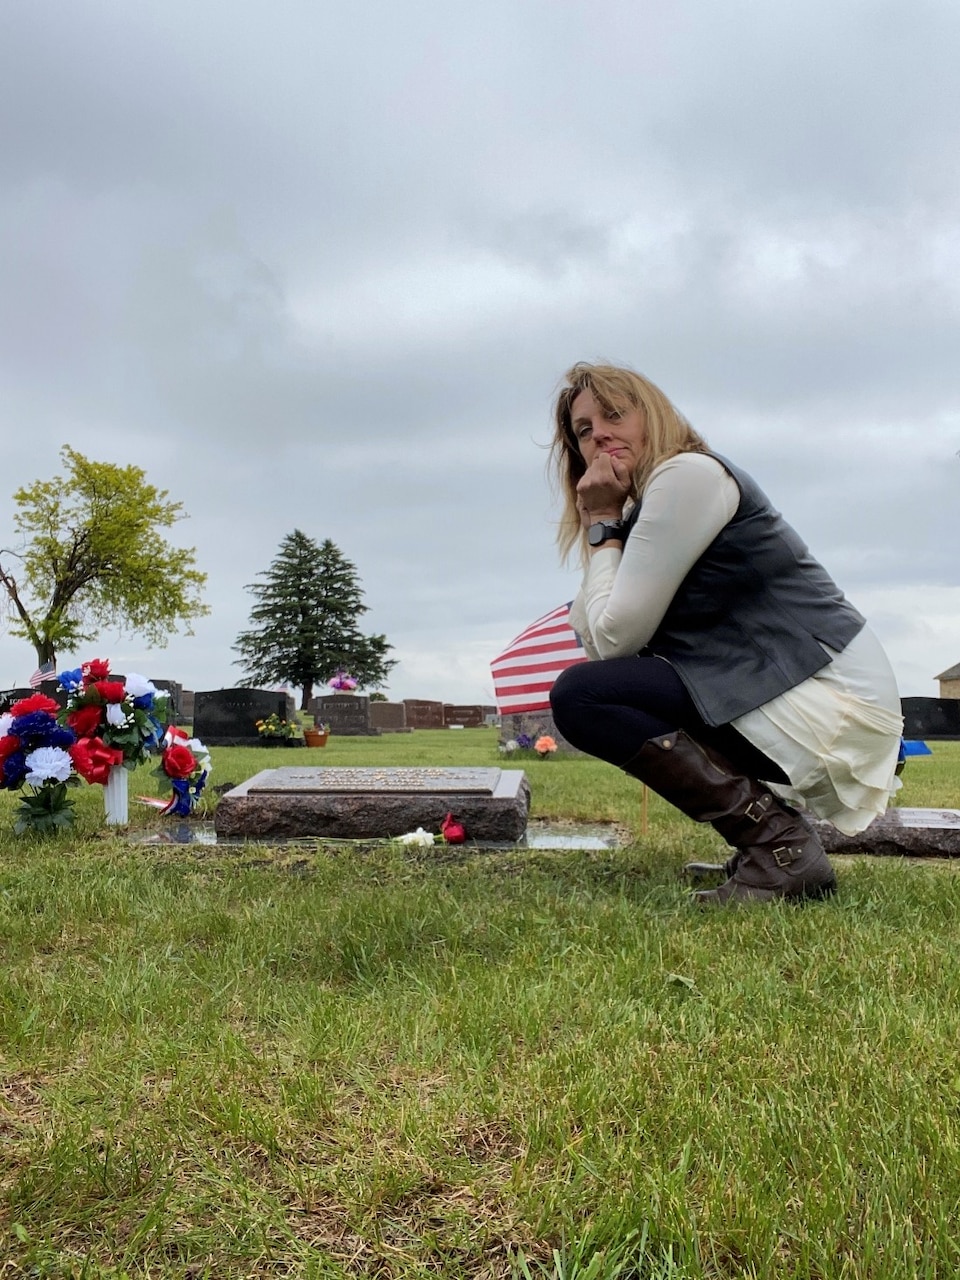 U.S. Navy Reservist, Personnel Specialist 1st Class Kitara Byerly looks over her husband’s grave in Swea City, Iowa. U.S. Army Reserve Specialist John Meyer took his life on November 16th, 2020. (Courtesy Photo)